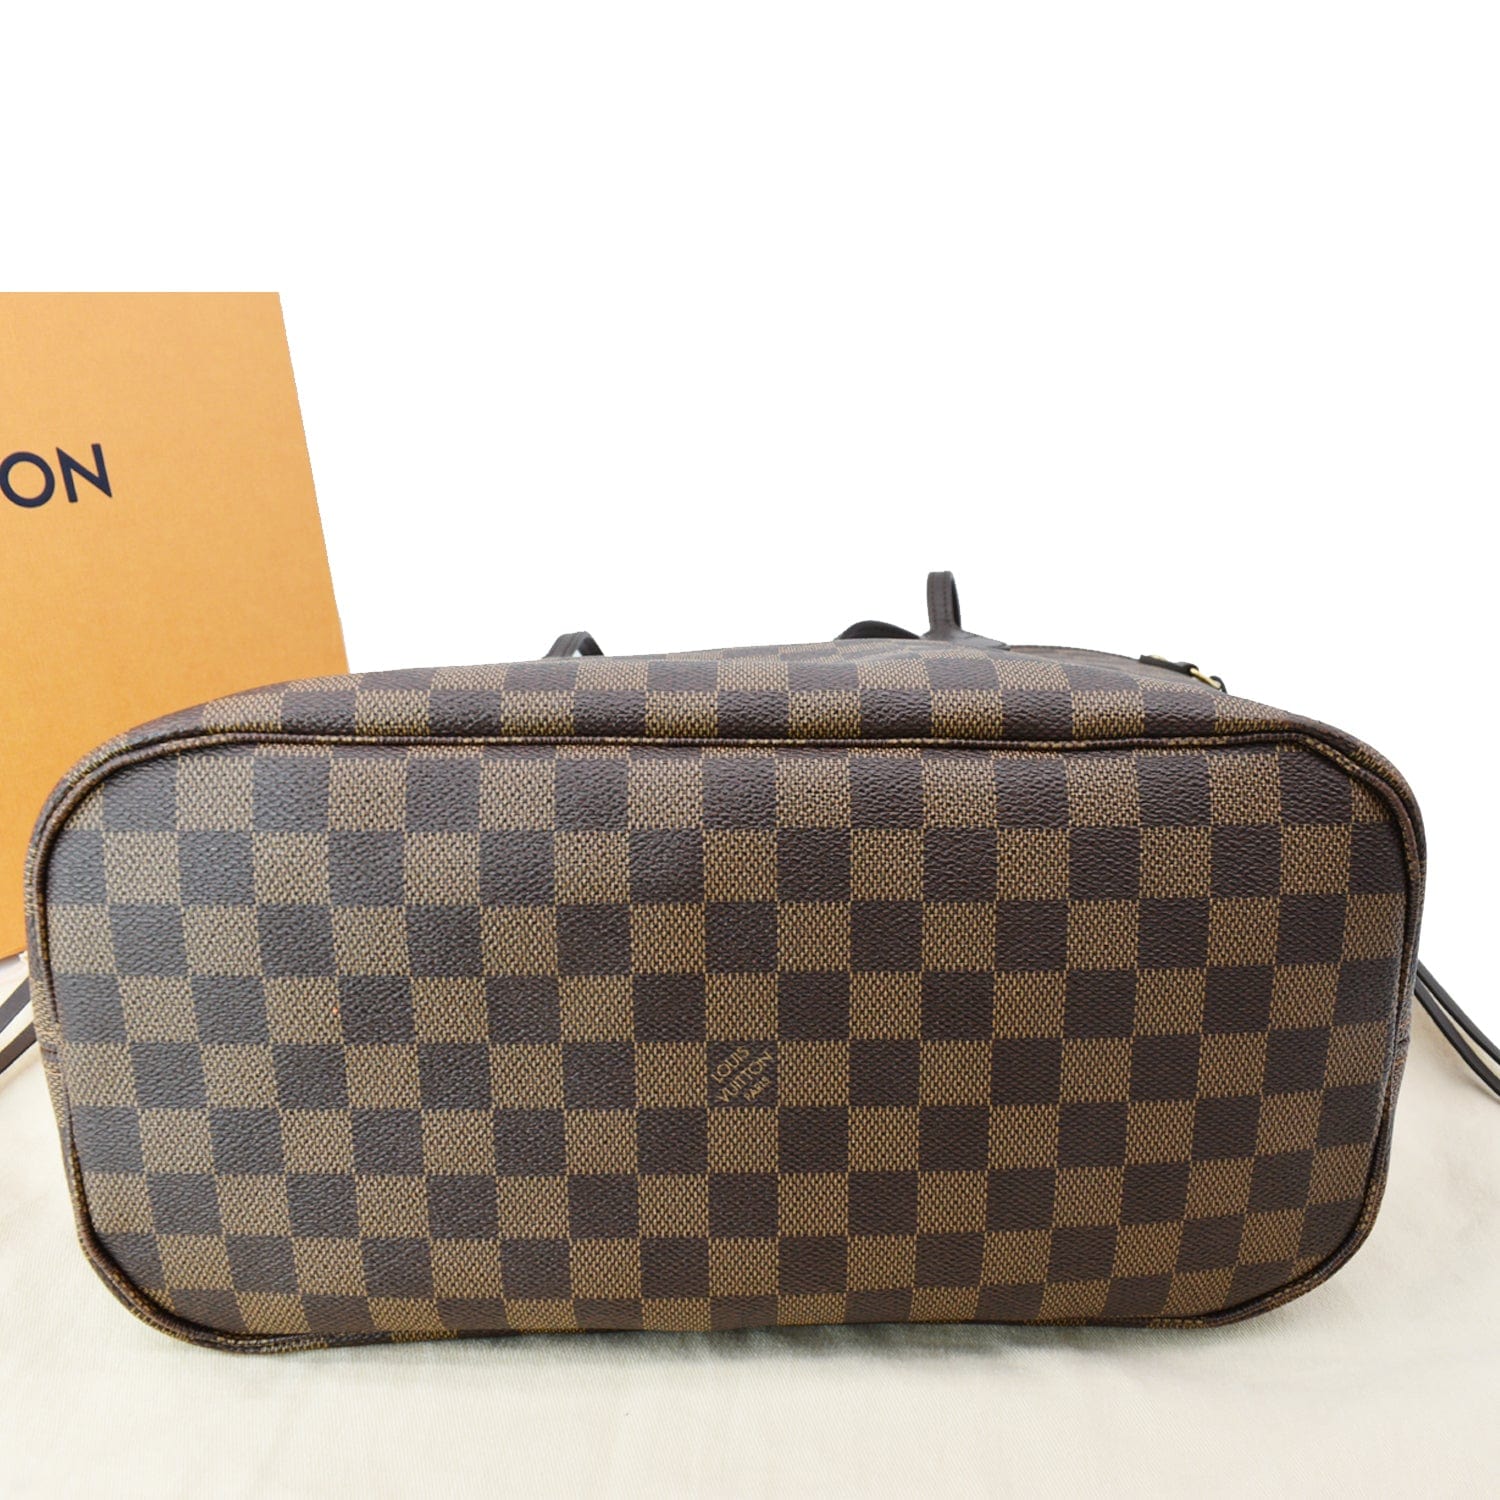 Louis Vuitton Neverfull MM Damier Ebene Leather Tote Shoulder Bag Purse LV  Brown for Sale in Miami, FL - OfferUp